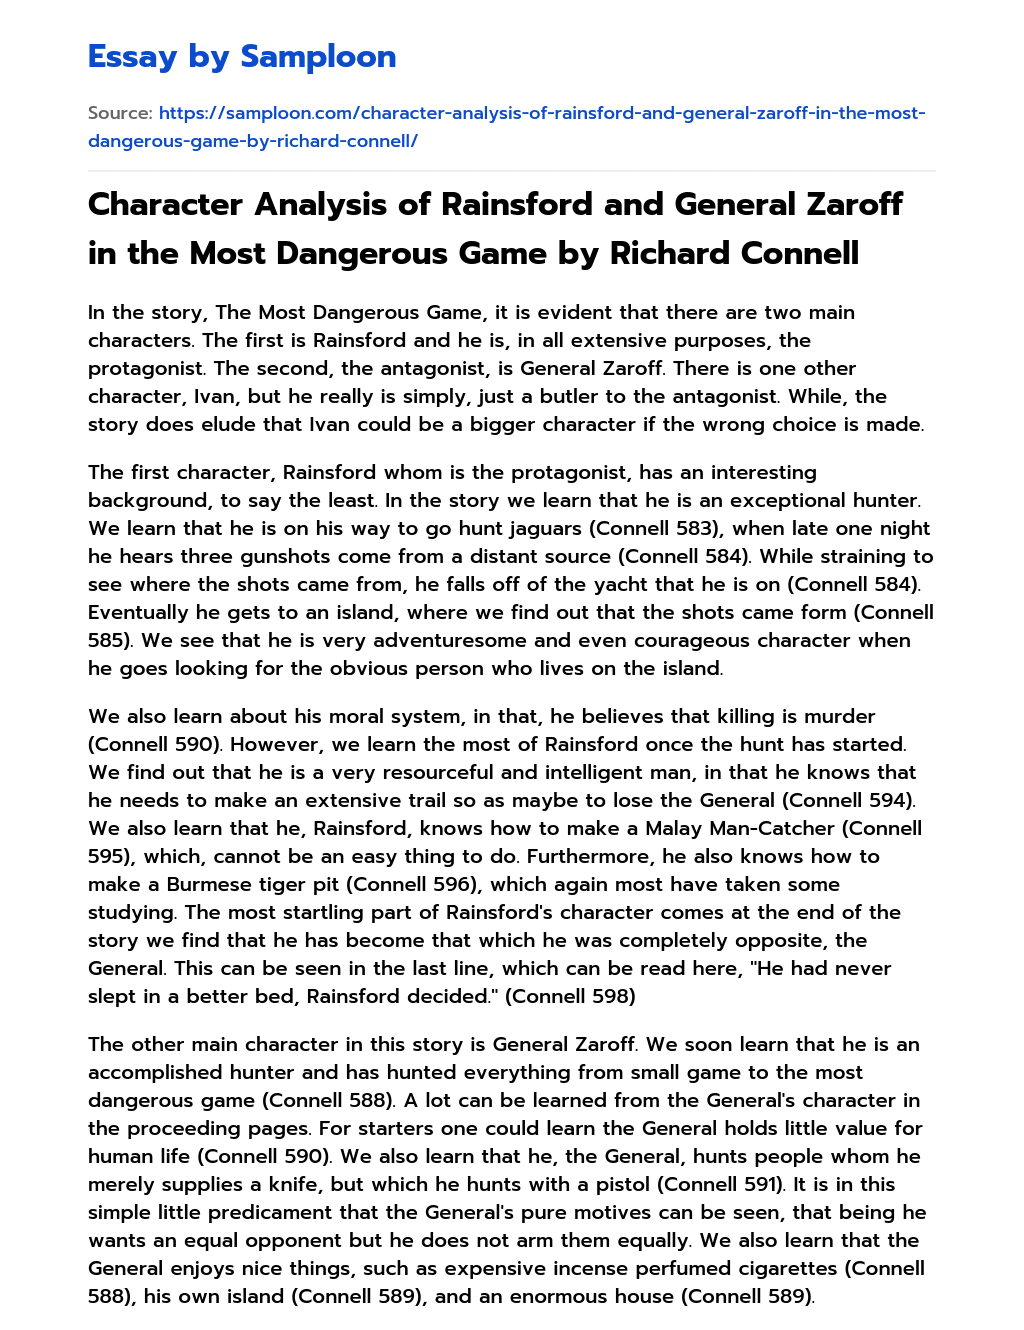 thesis statement about general zaroff